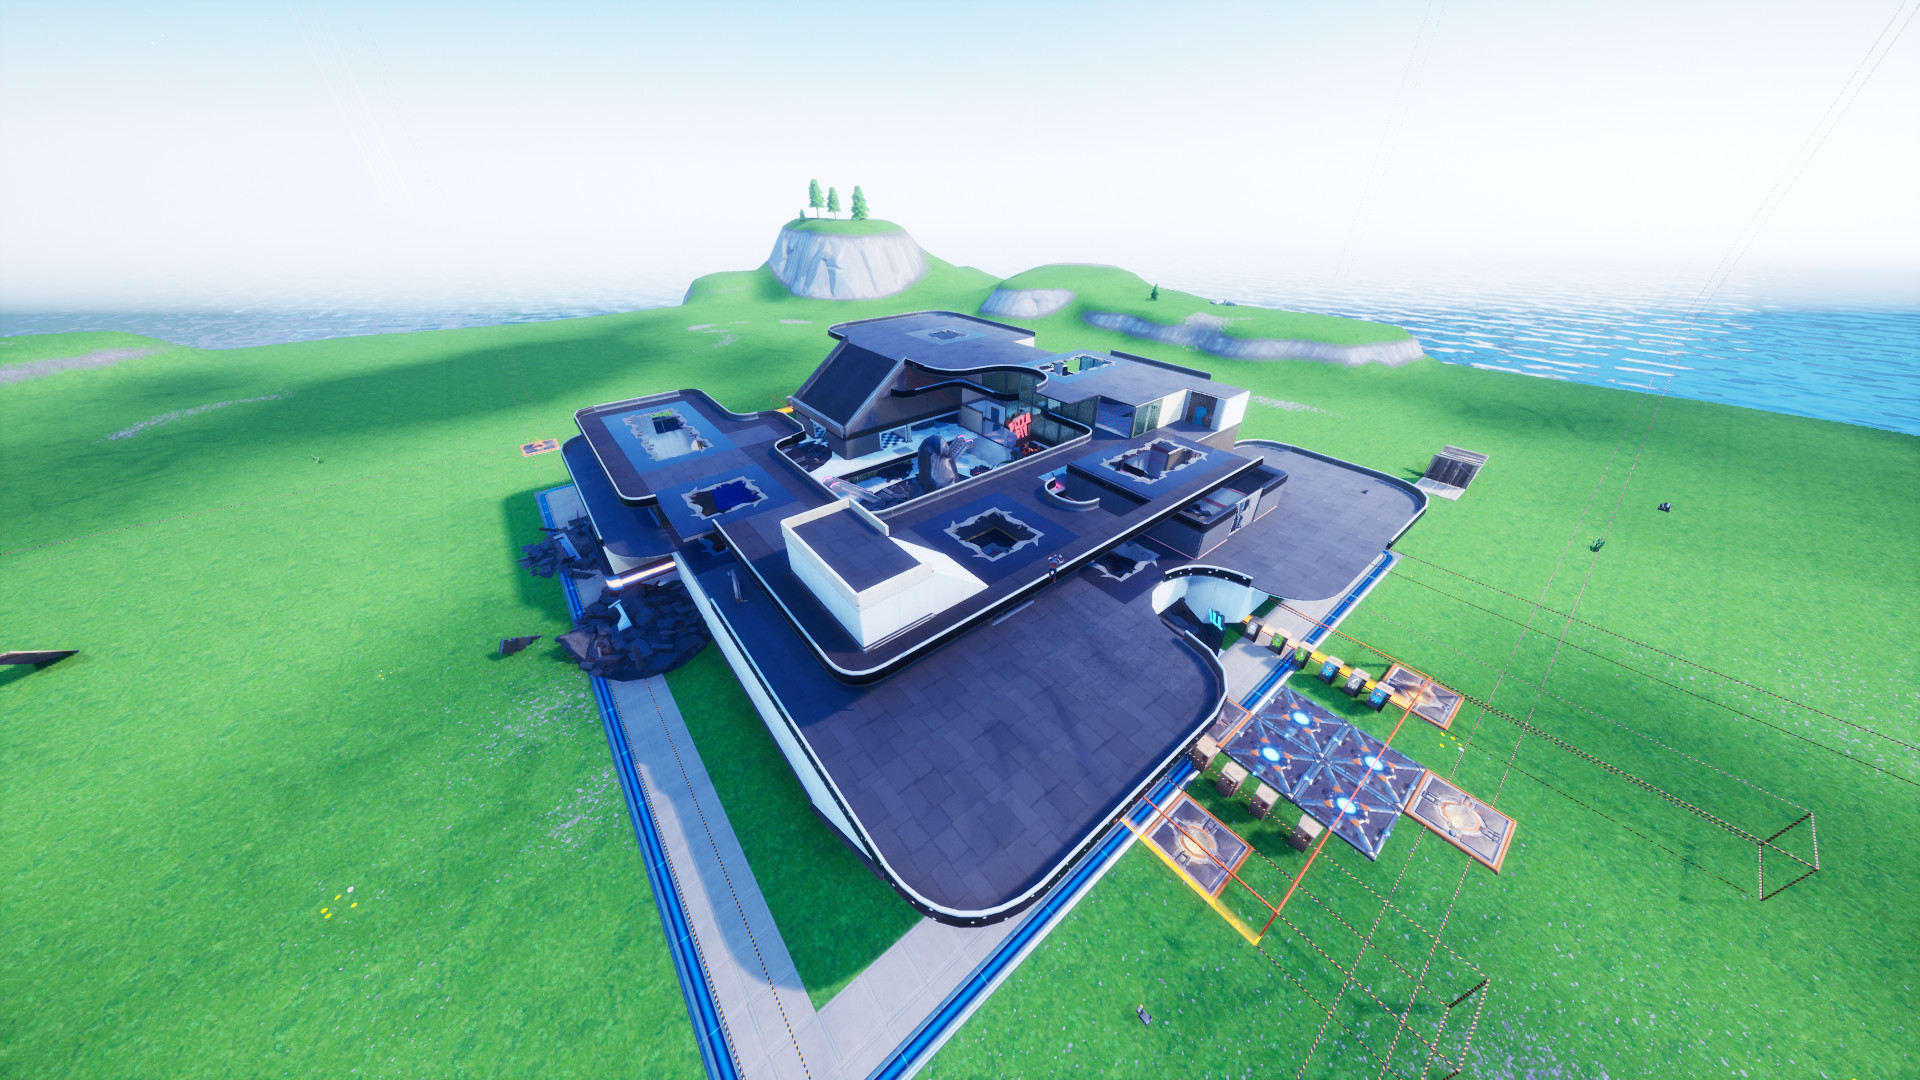 Maps created by enderbite at Fortnite Creative HQ